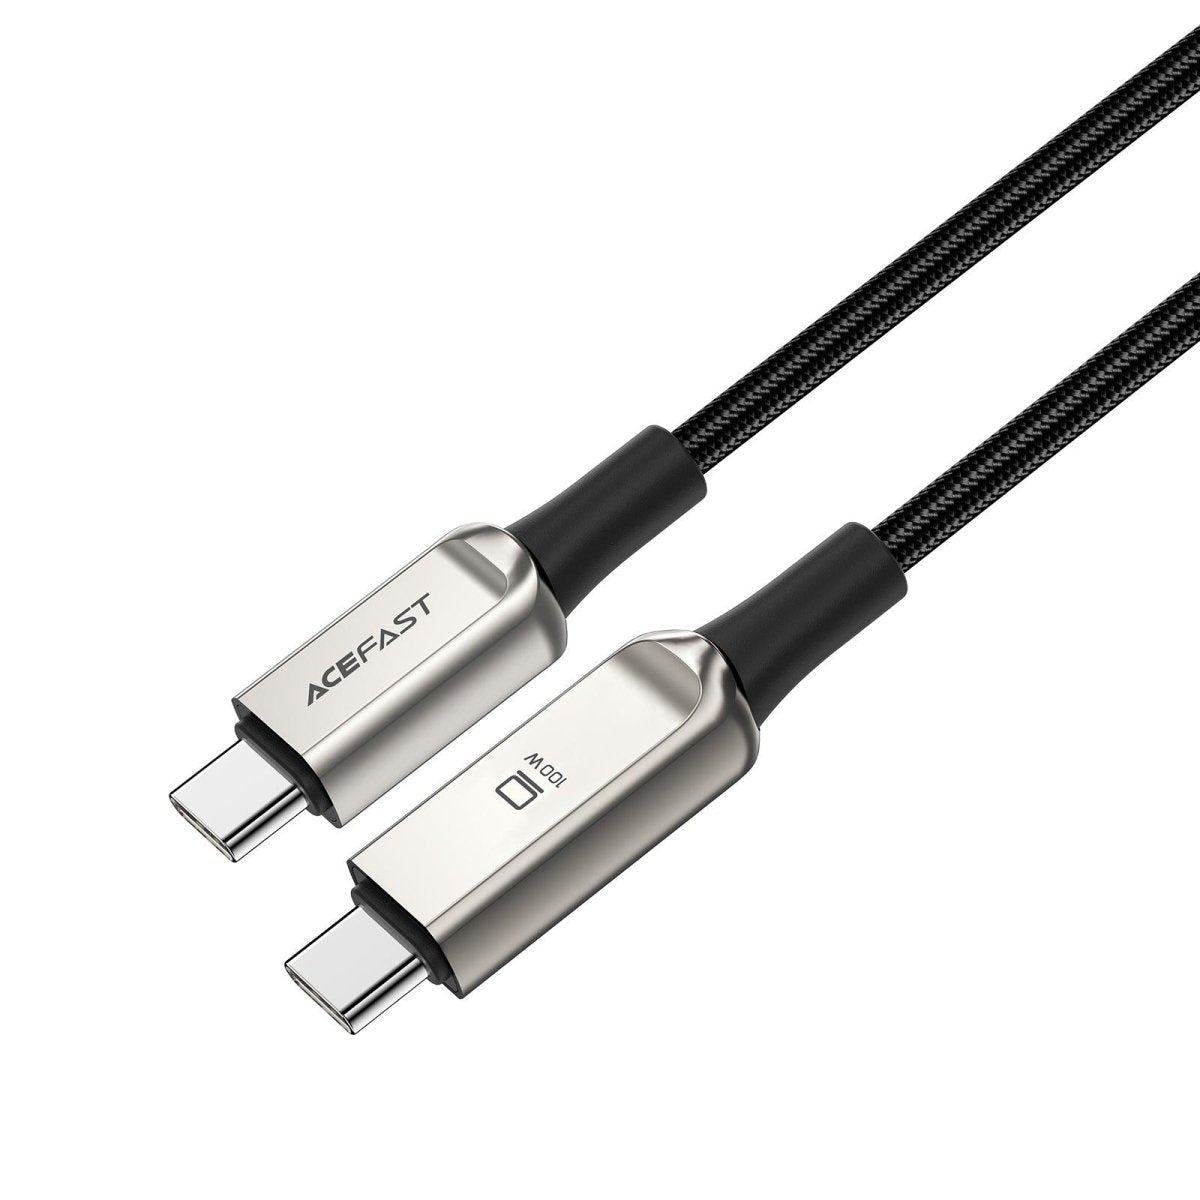 SILVER C6-03ACEFASTACEFAST 100W LED Display USB C to USB C Cable C6-03 - ACEFASTSILVER C6-03